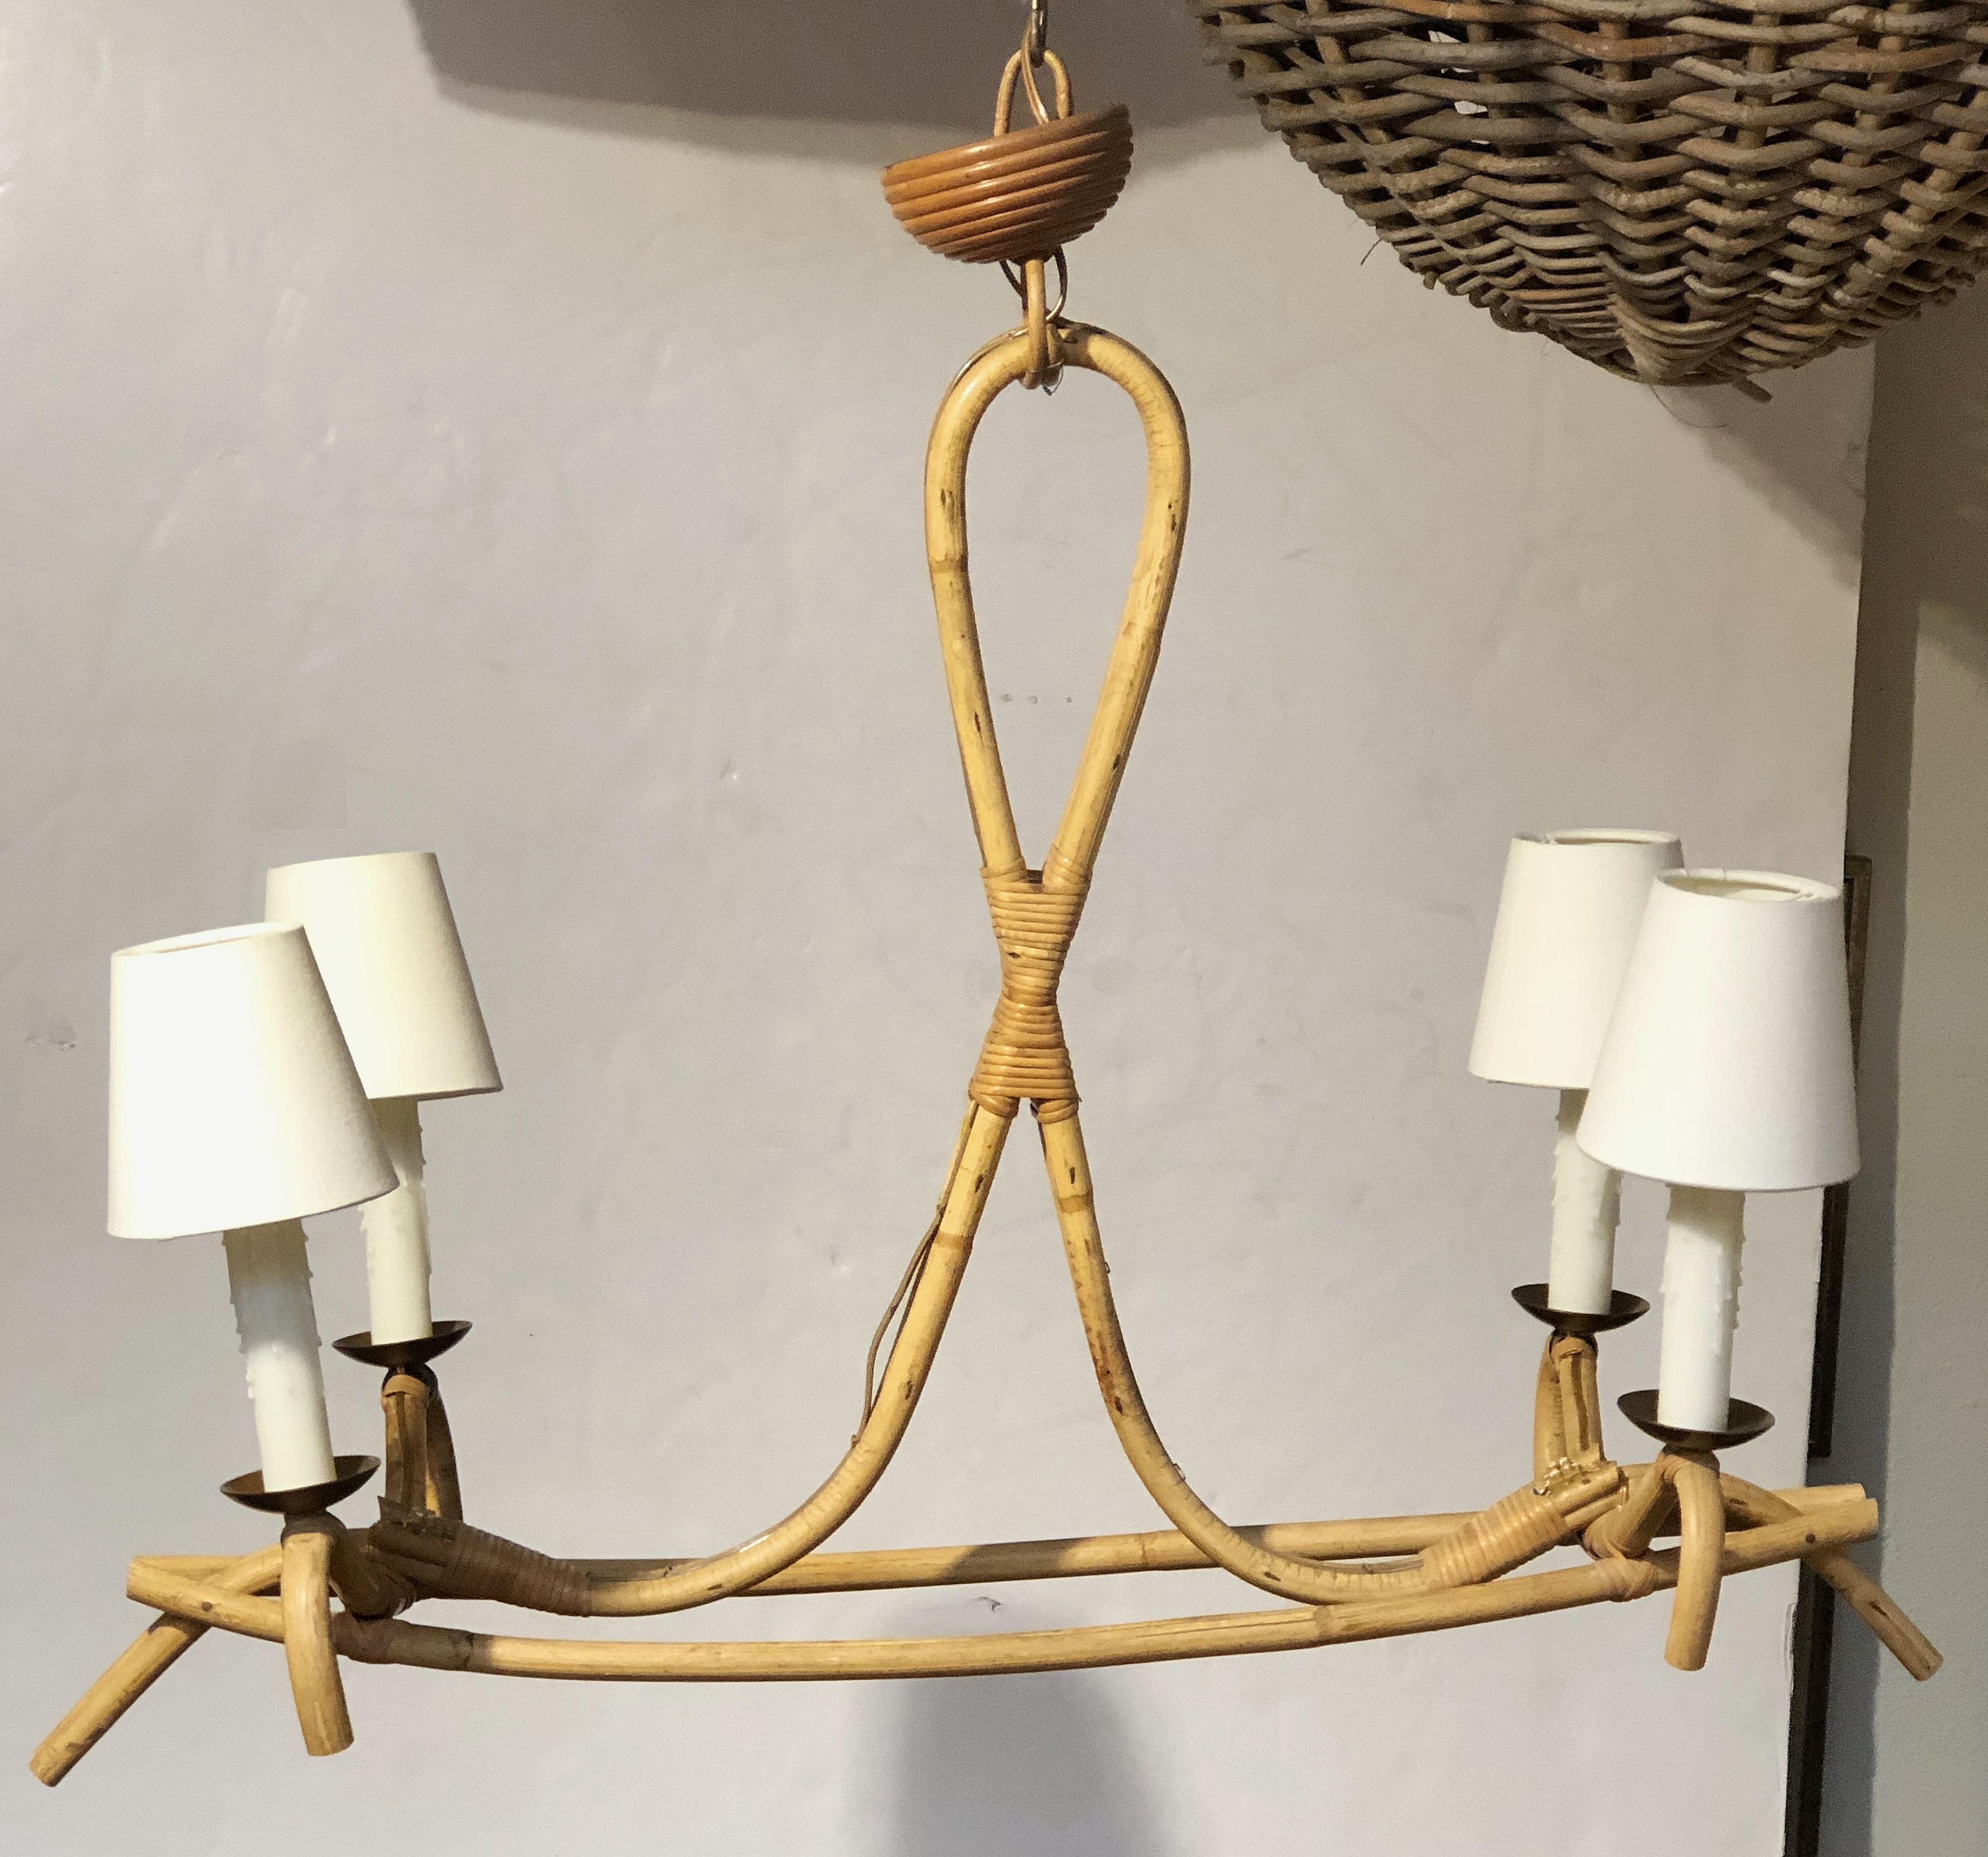 A fine French bamboo hanging fixture from the mid-20th century, featuring four lights, each light with brass bobeche and optional shade, on a stylish bamboo and rattan support, attributed to the famed French designer, Louis Sognot.

Attributed to